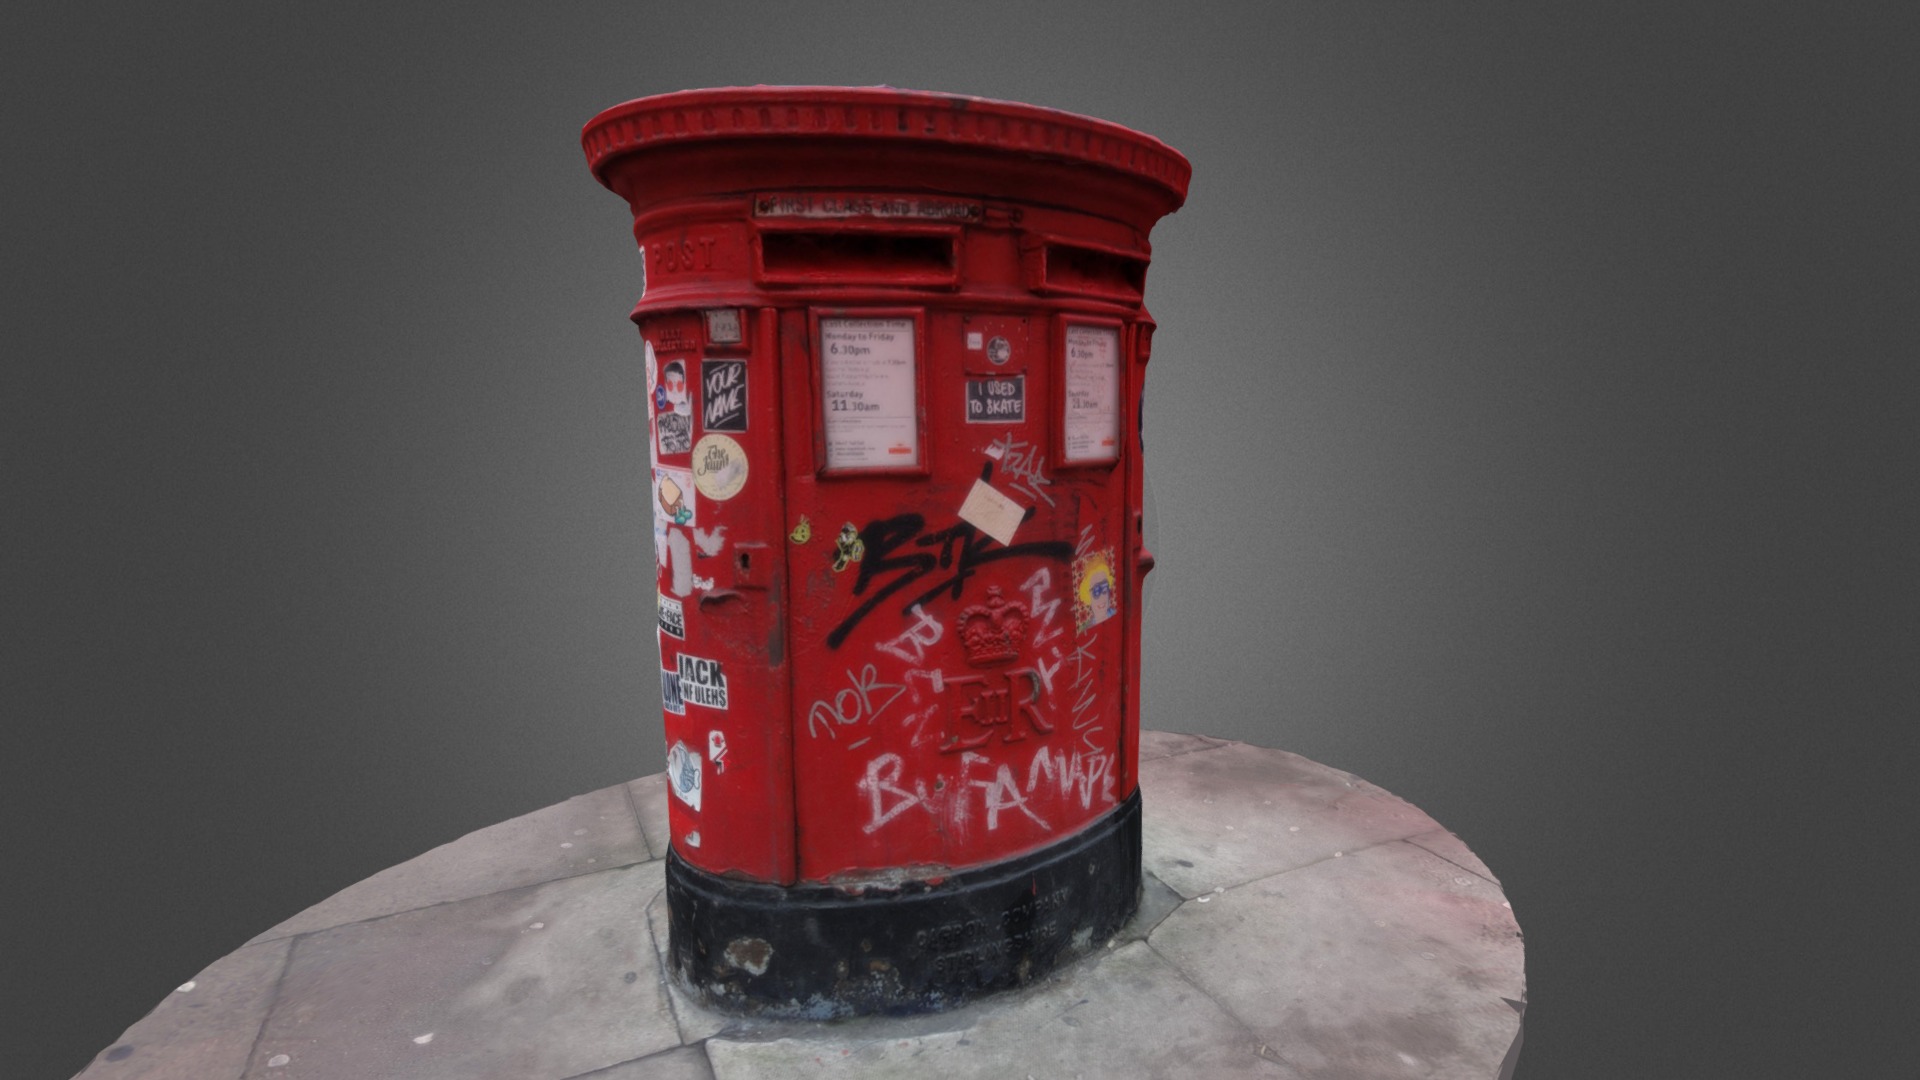 3D model Double Postbox, Shoreditch, London - This is a 3D model of the Double Postbox, Shoreditch, London. The 3D model is about a red fire hydrant.